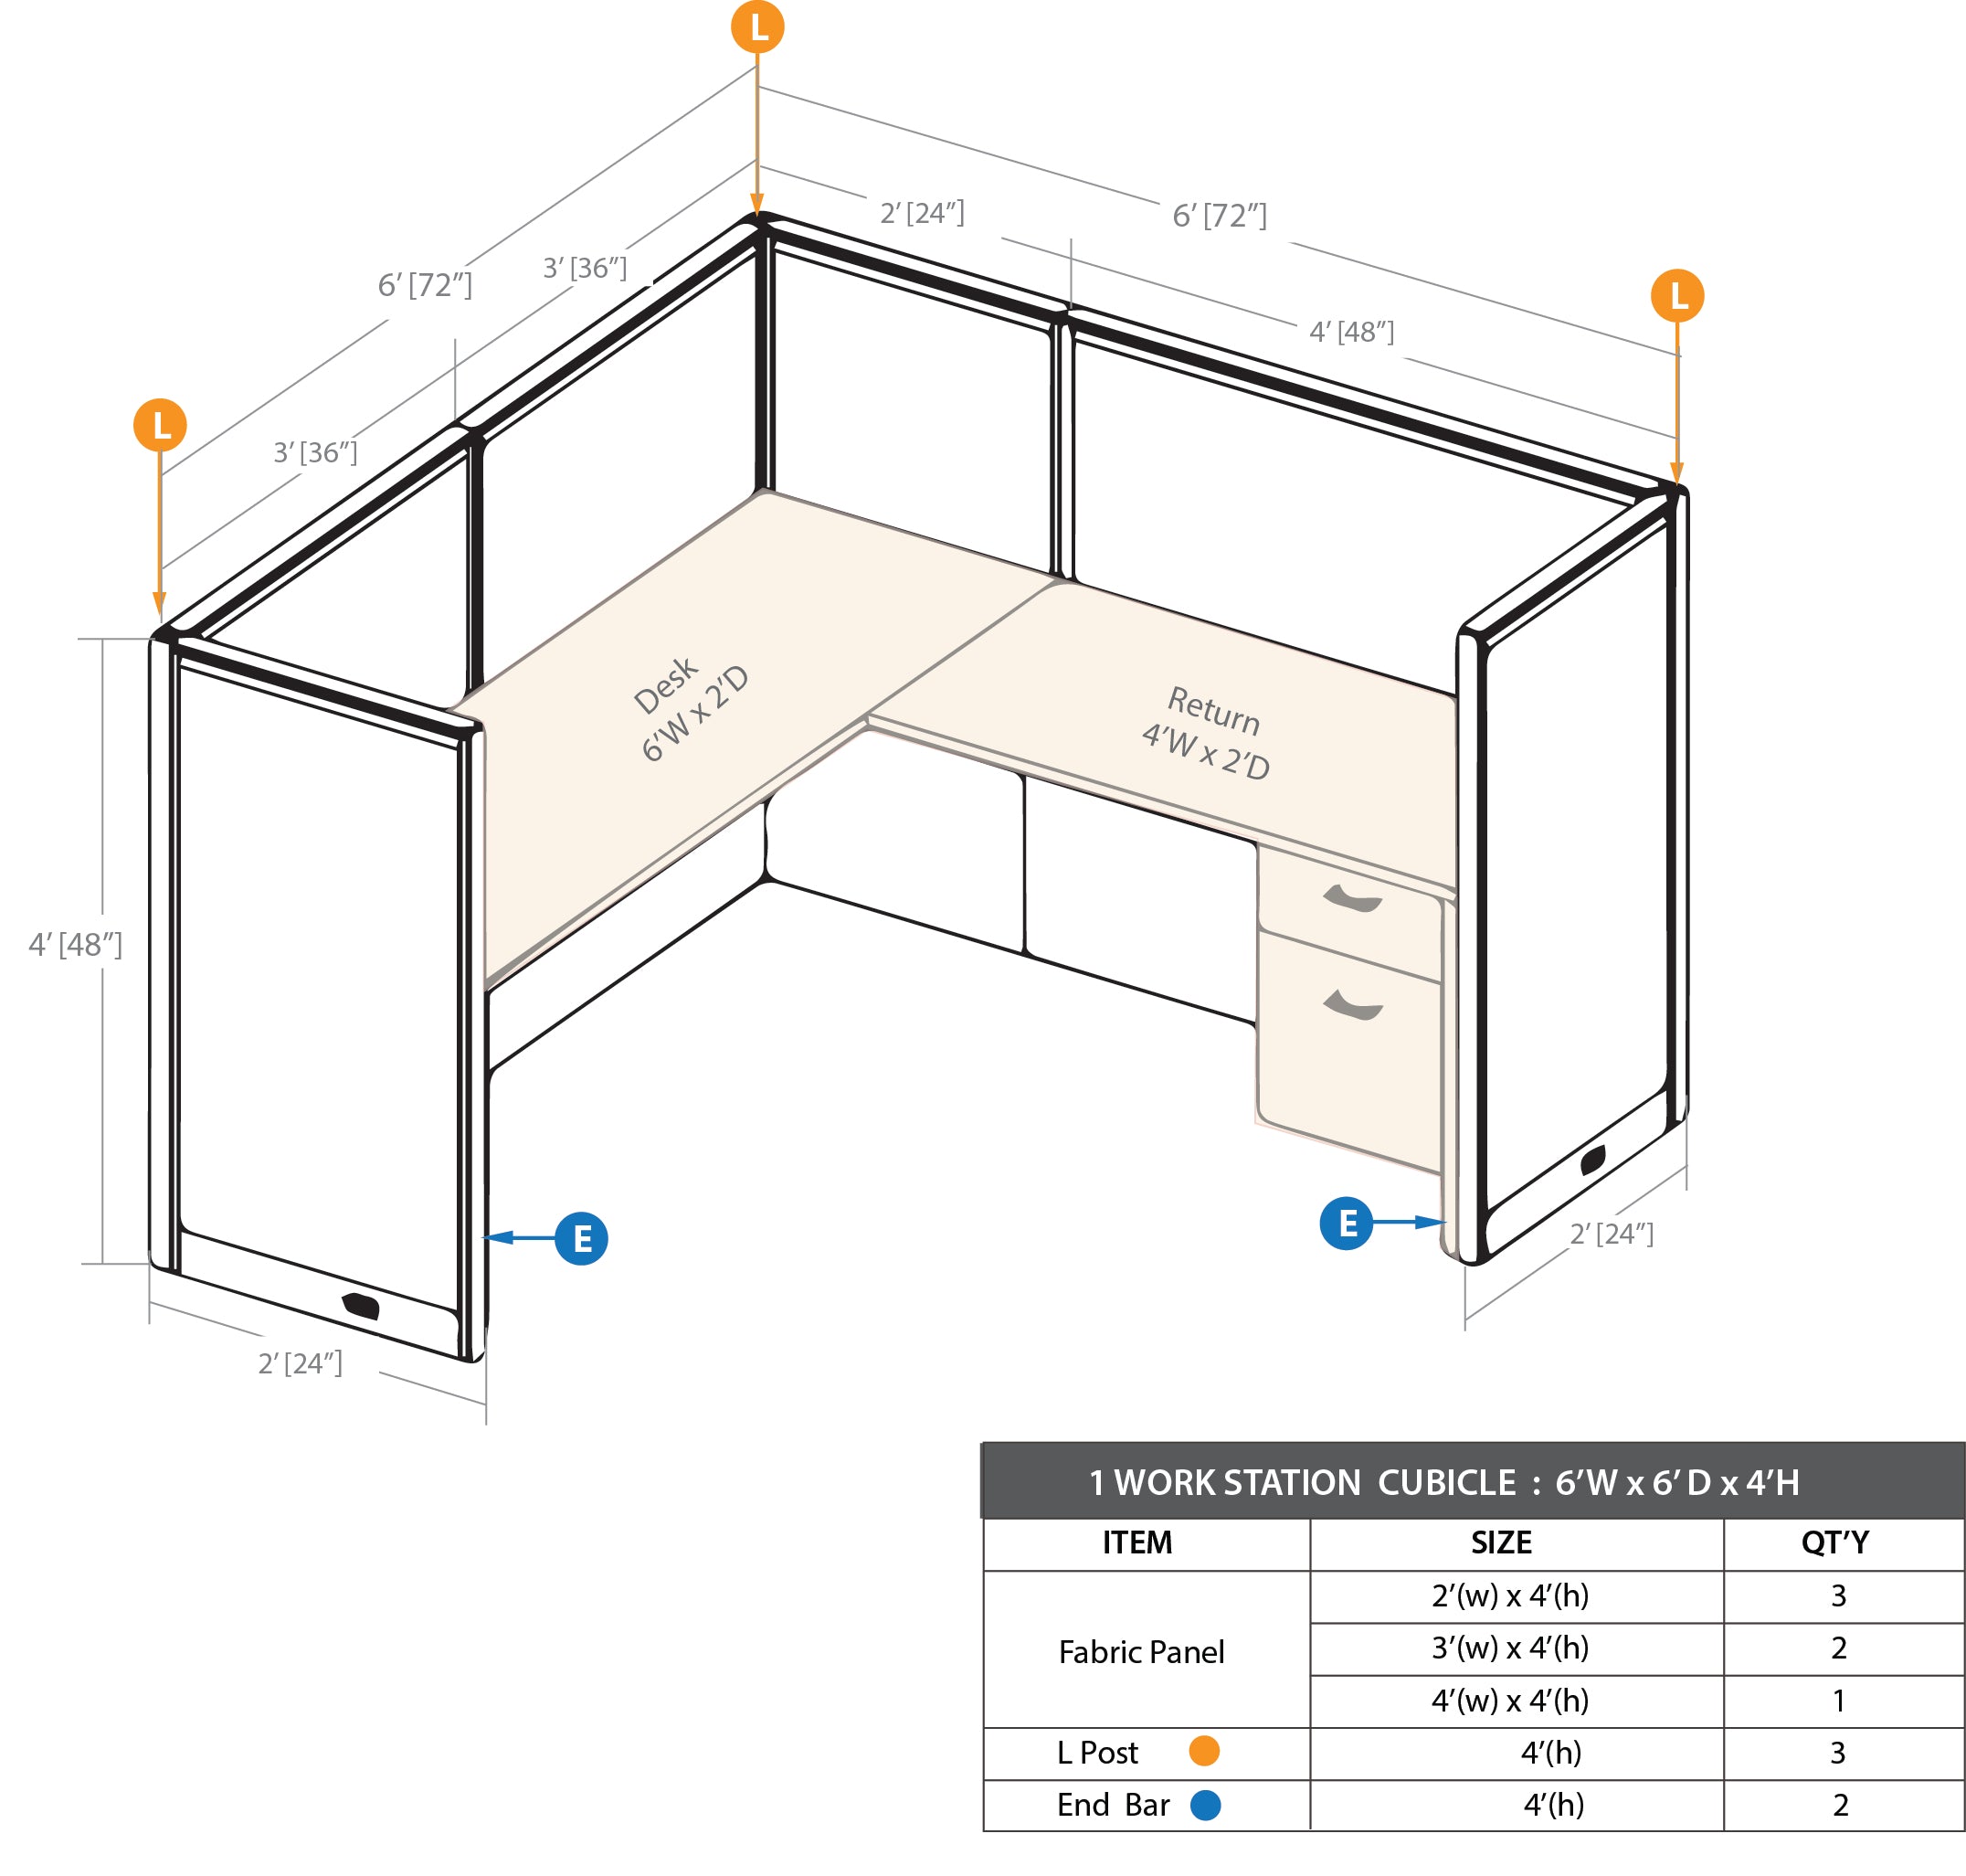 GOF 1 Person Workstation Cubicle (6'D x 6'W x 4'H) / Office Partition, Room Divider - Kainosbuy.com